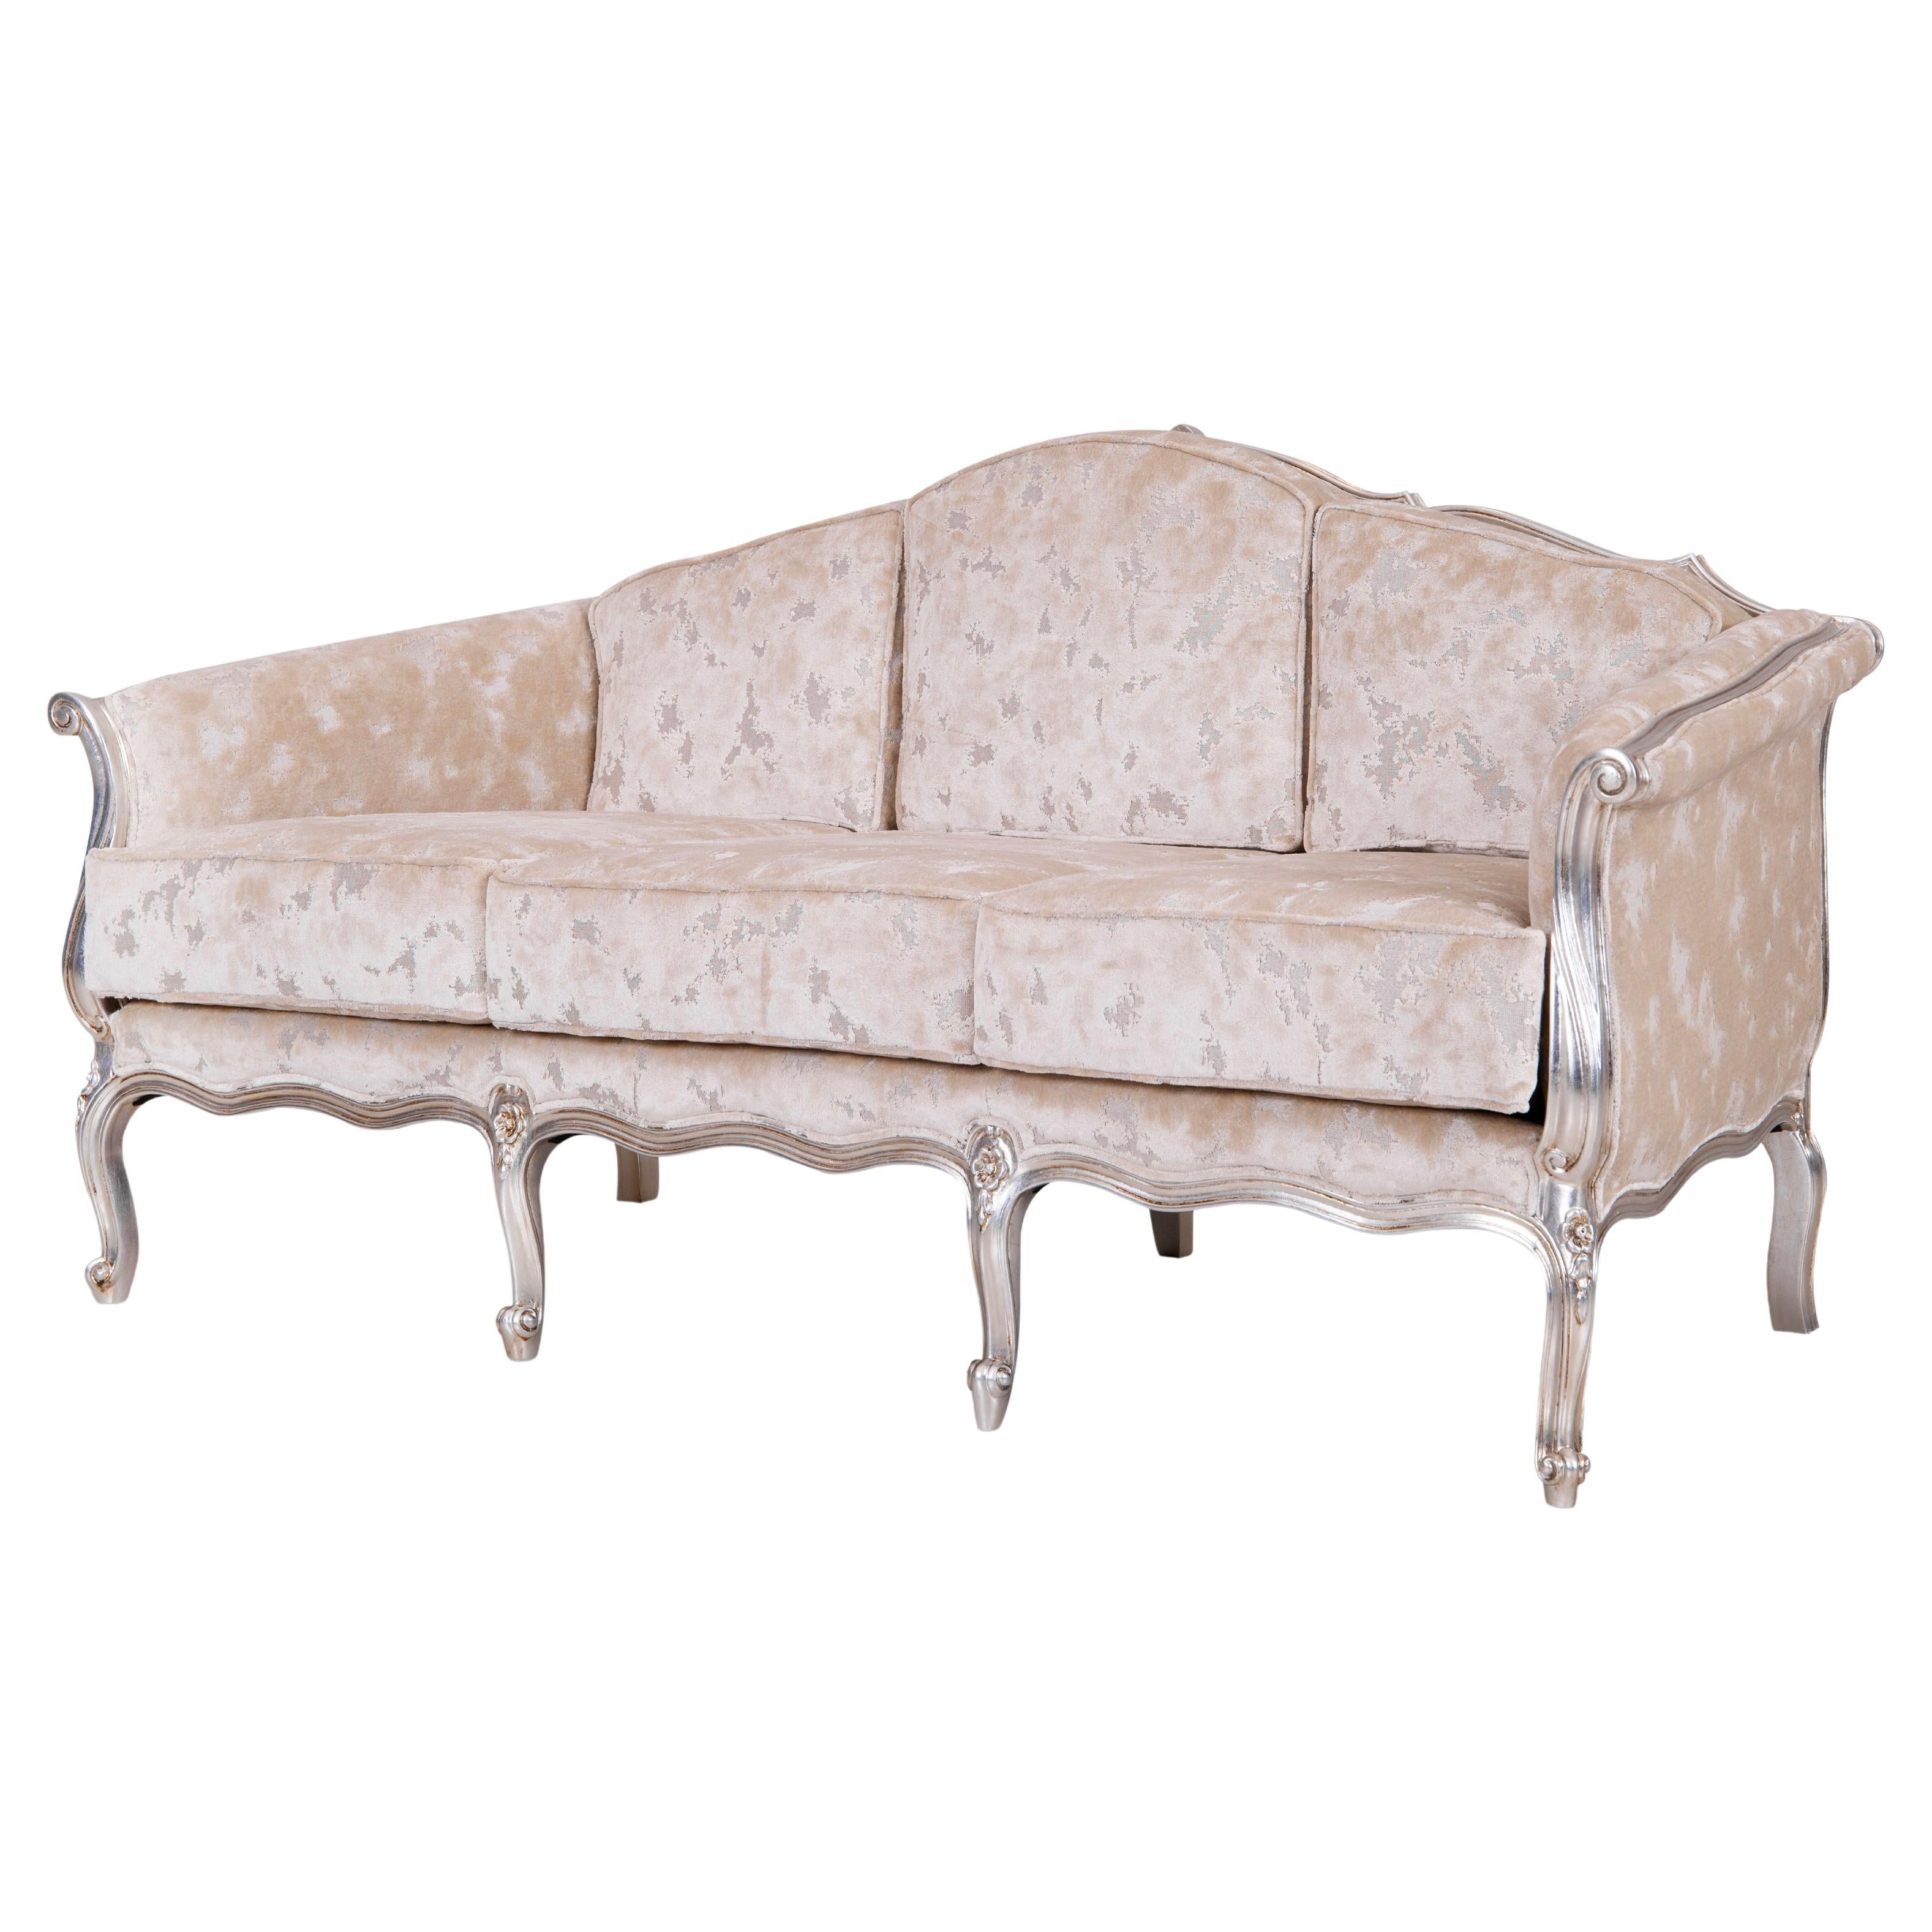 Talha Real Sofa, Neoclassical Collection, Handcrafted in Portugal - Europe by GF Modern.

The Talha Real sofa adds a sophisticated and refined touch to any living area. The sofa is upholstered in beige jacquard-patterned velvet with aged silver leaf